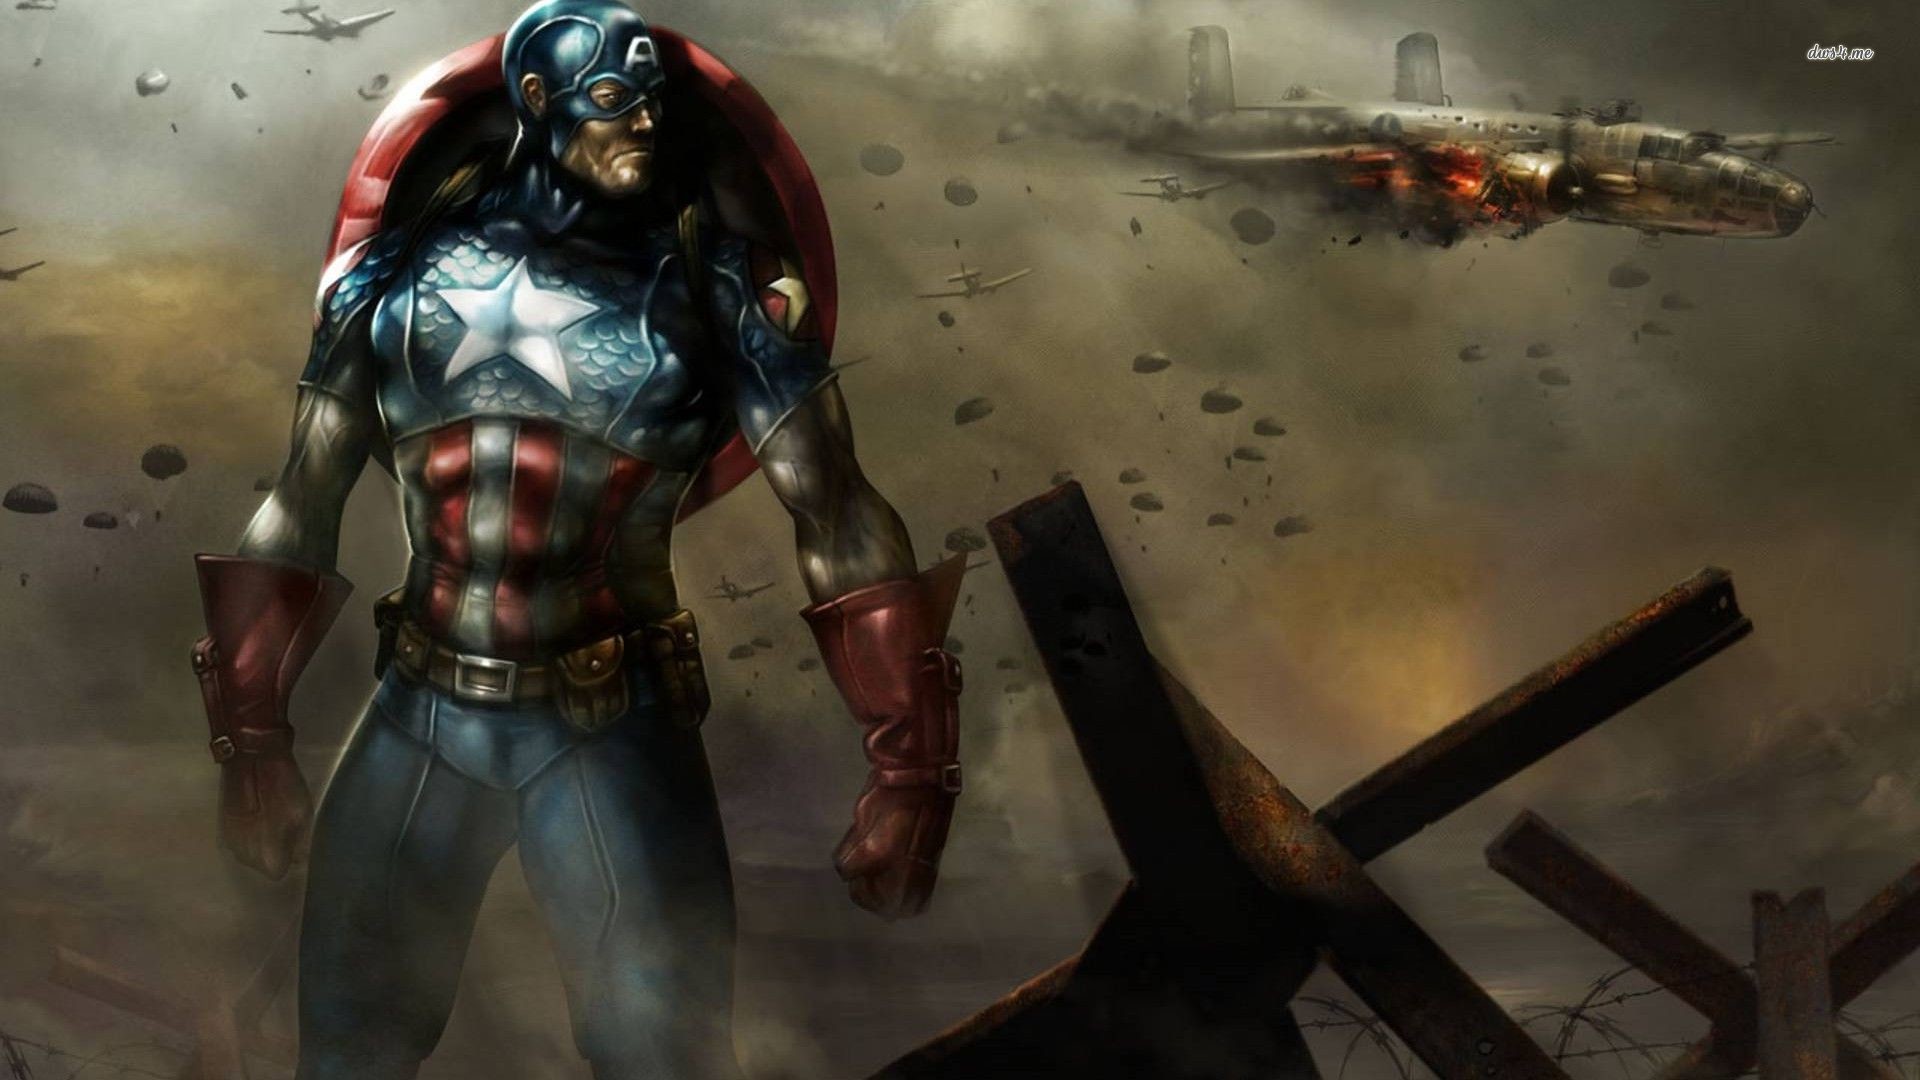 1920x1080 Image In High Quality - Captain America by Therese Liversage